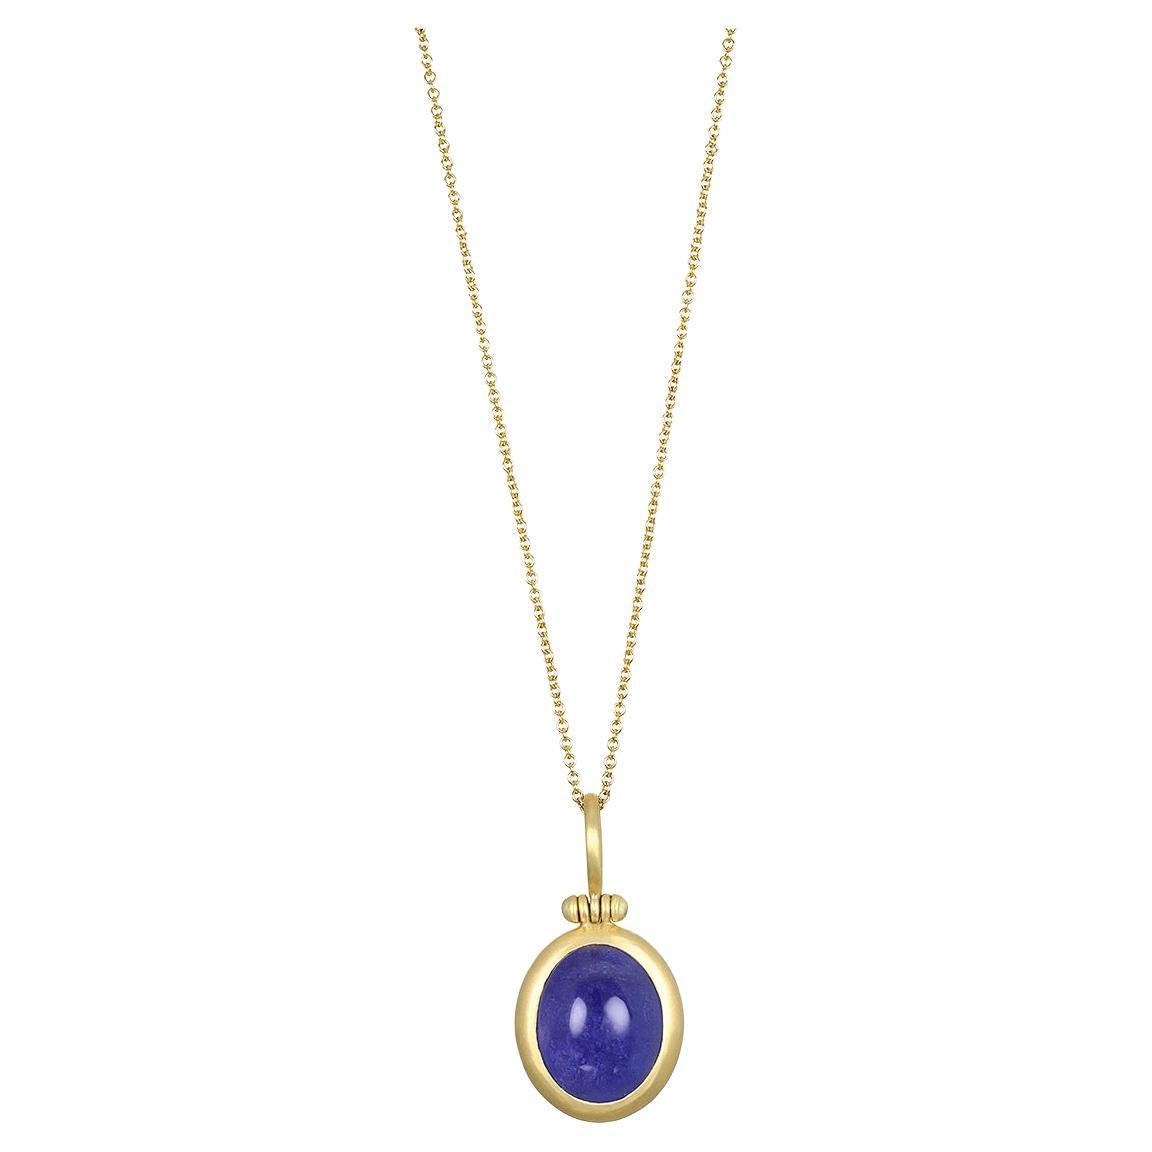 Faye Kim's 18 Karat Gold Tanzanite Cabachon Hinged Ball Pendant, with its striking blue hue, is sure to make a design statement! This unique, one of a kind piece is finished with Faye's signature clean bezel and hinged bail. 

Photos also show